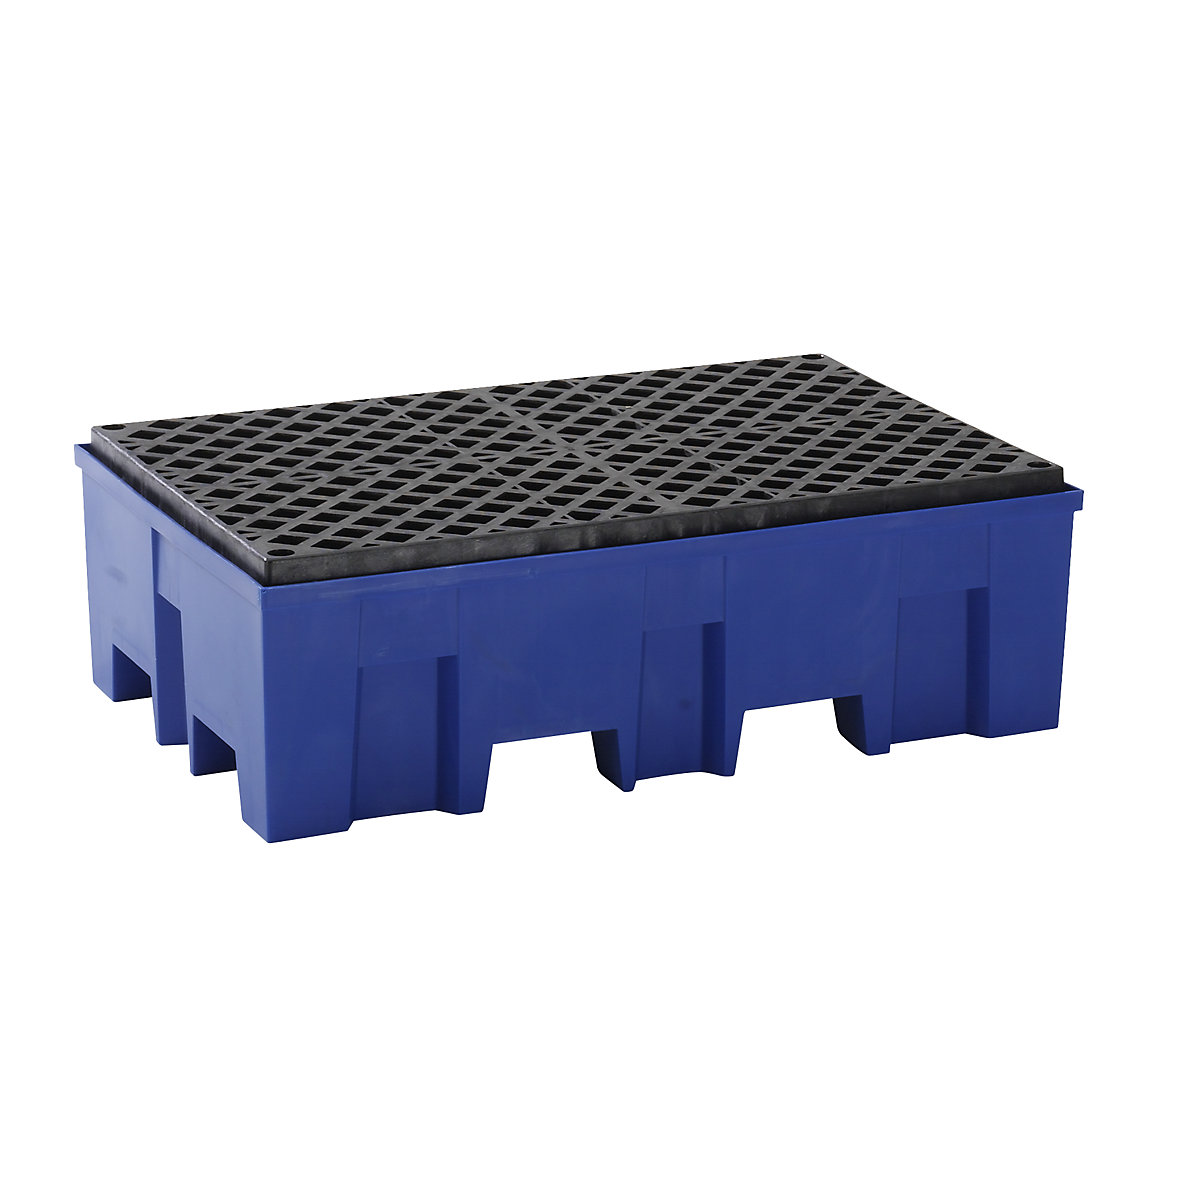 PE sump tray for 2 x 200 litre drums, clearance for forklift, height 350 mm, with PE mesh grid-5